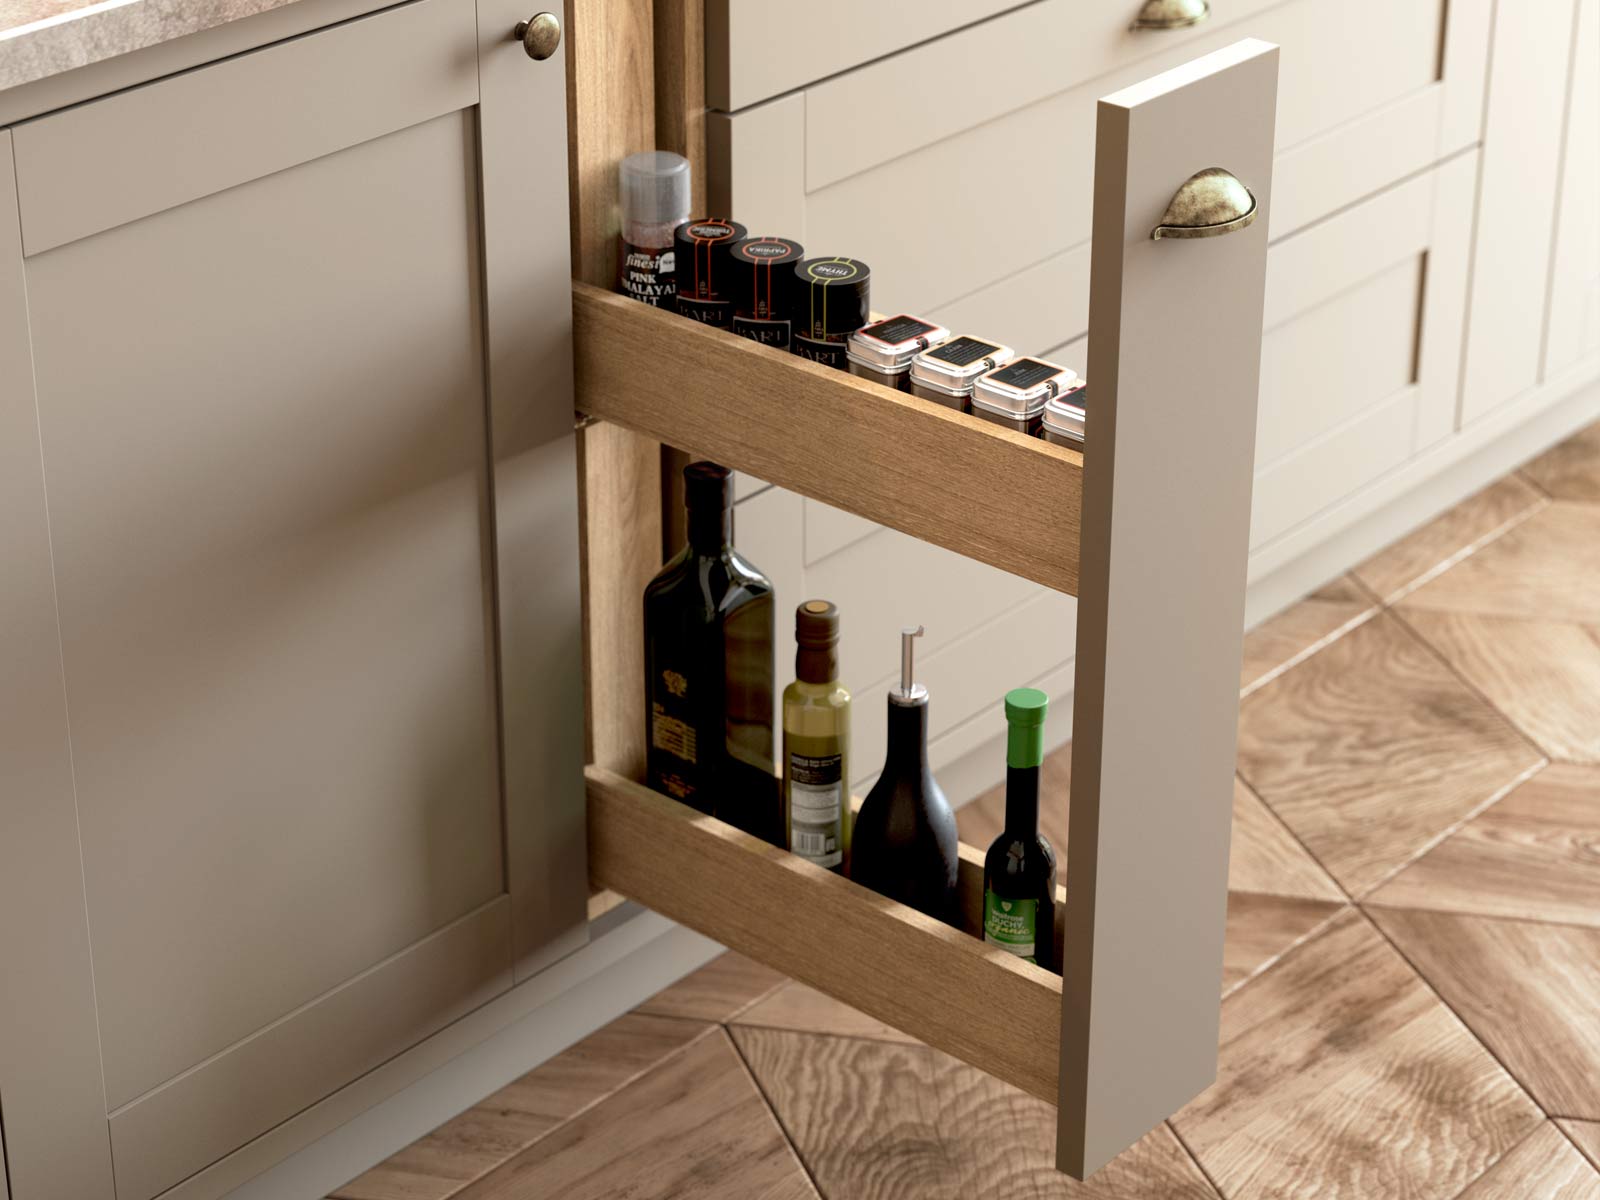 Pull-out larder spice rack in a Shaker kitchen